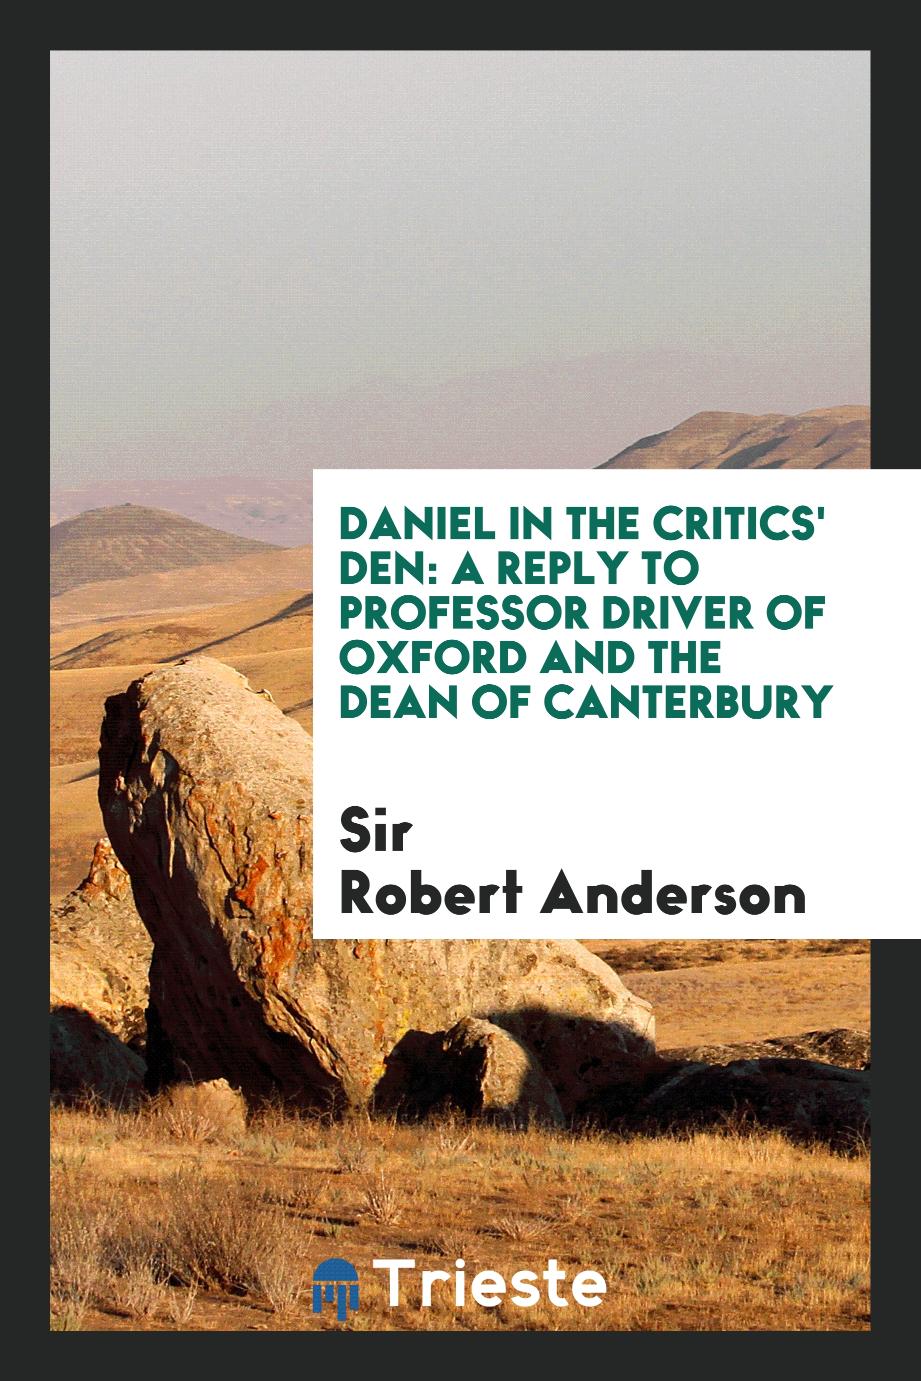 Daniel in the critics' den: a reply to Professor Driver of Oxford and the Dean of Canterbury